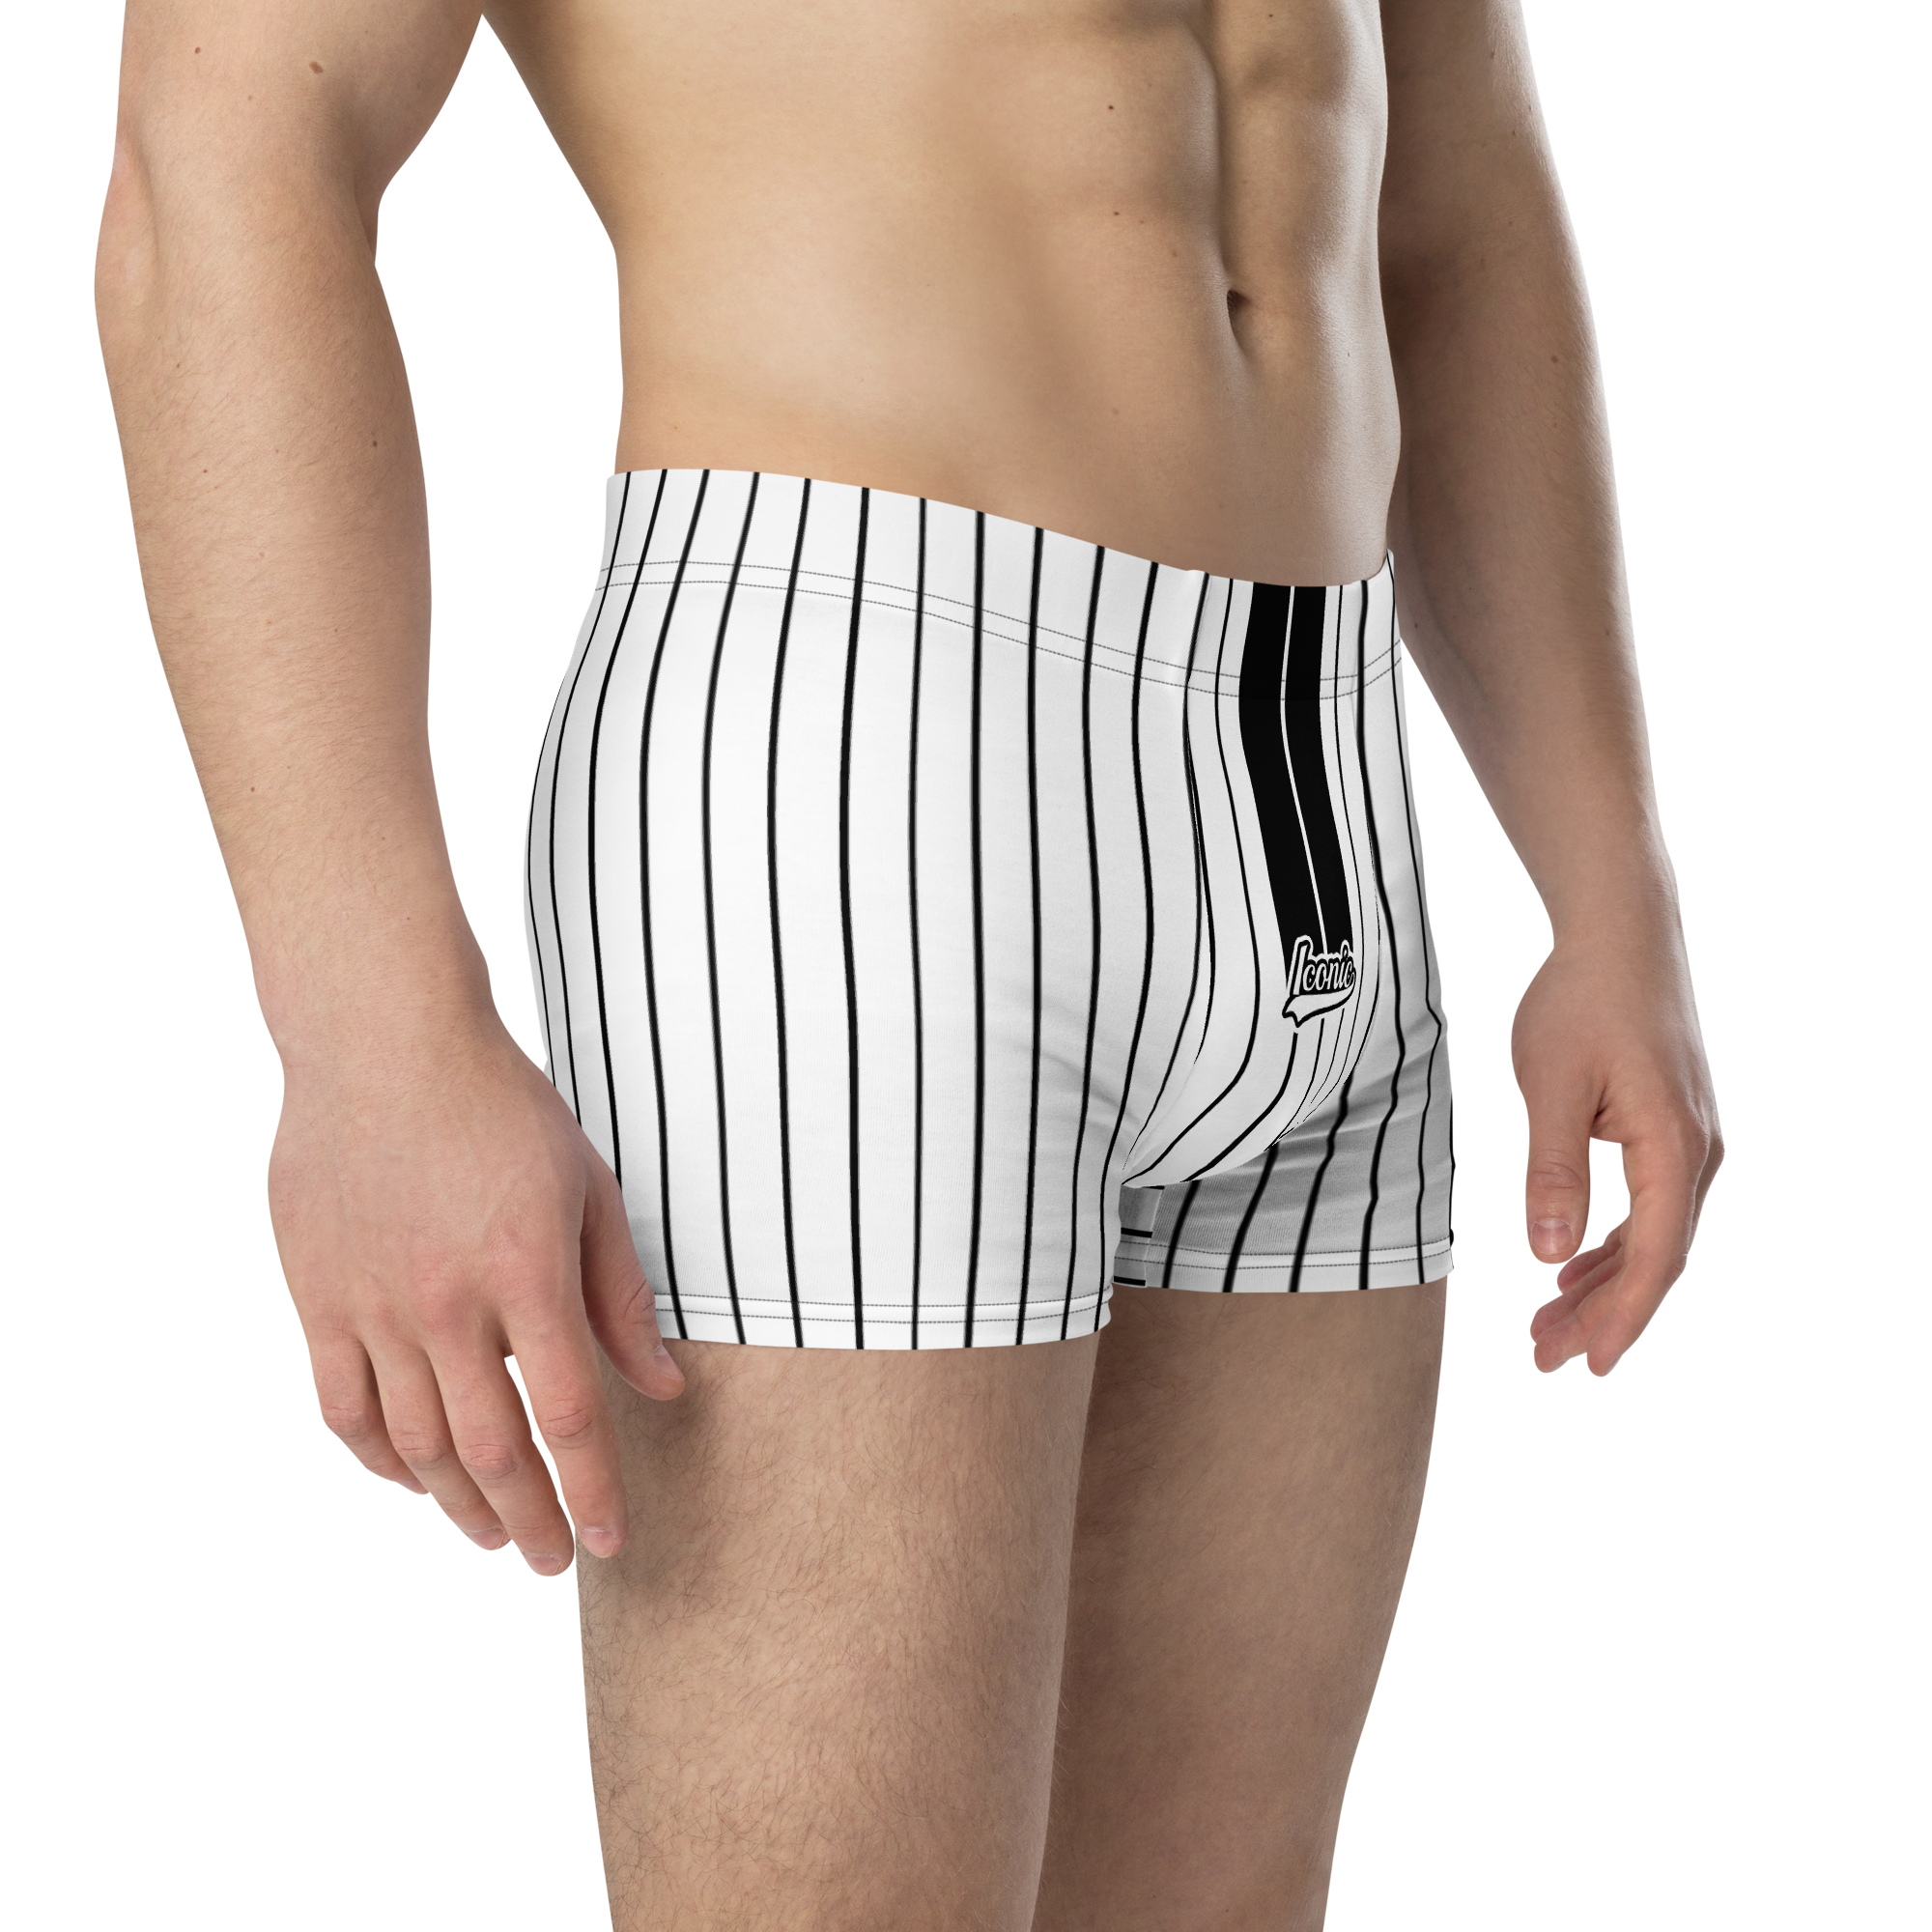 ROYAL Team Iconic. Athletix Boi Briefs Pinstripe Wh and Blk